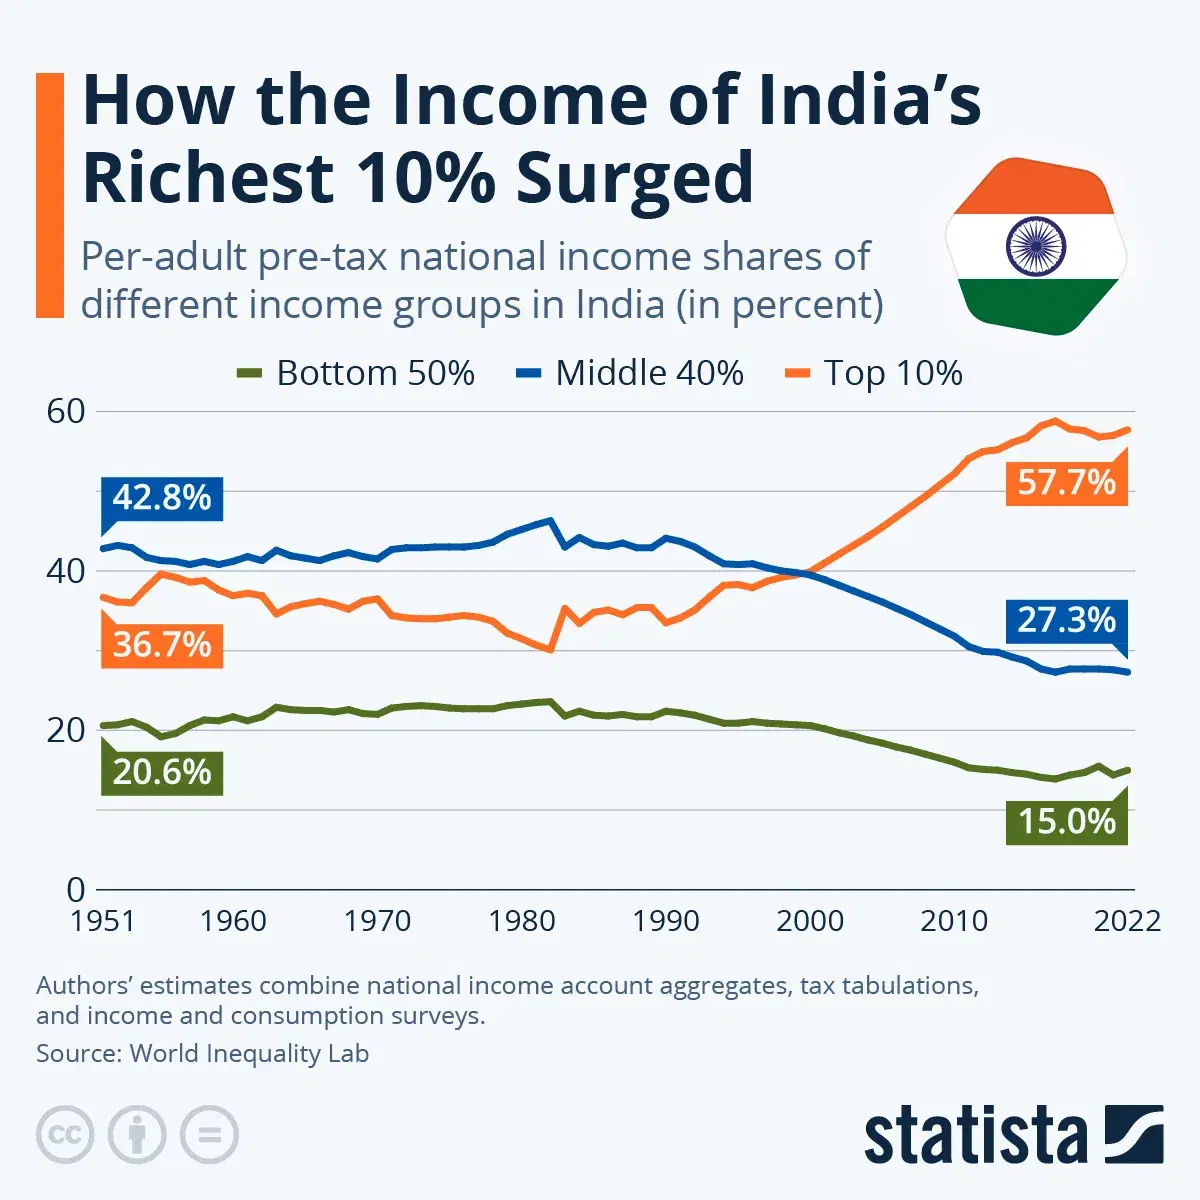 How the Income of India's Richest 10% Surged